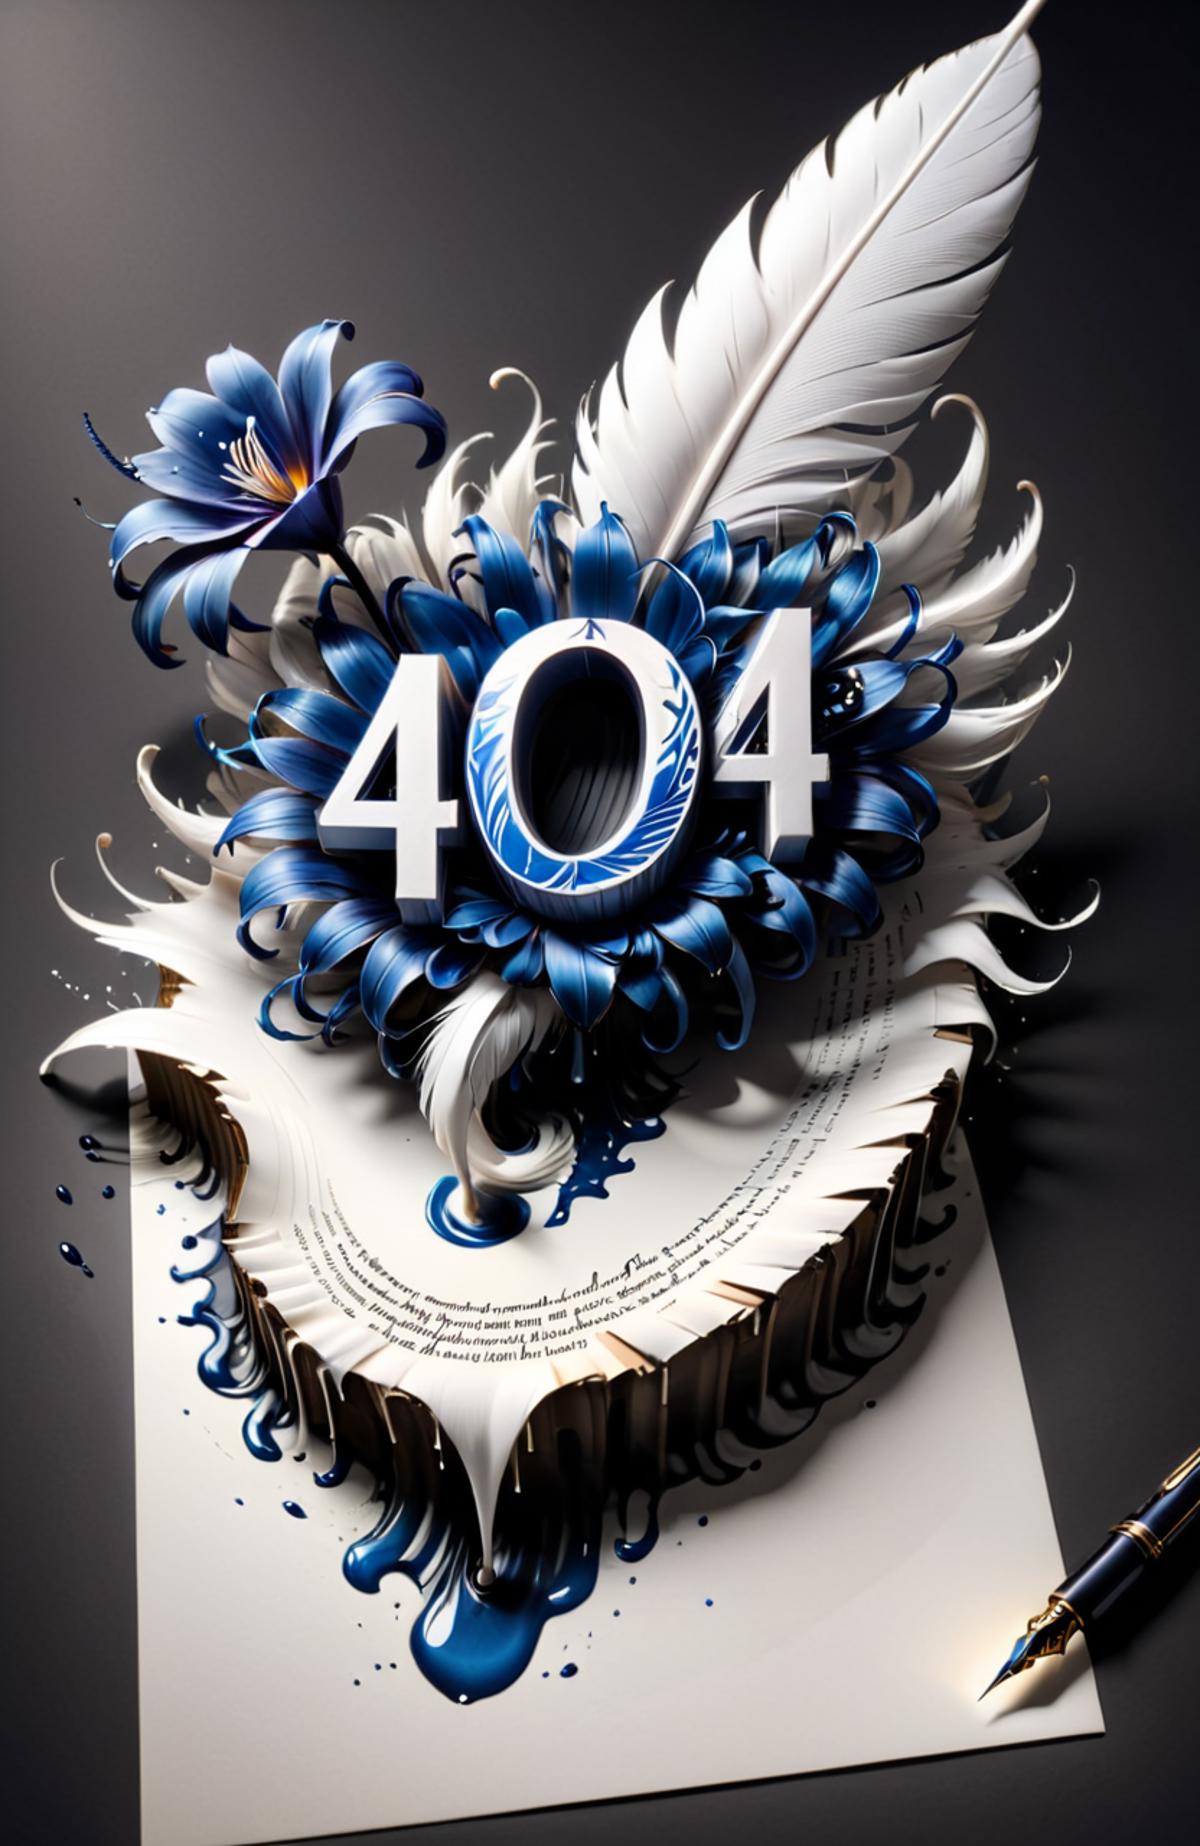 The 404ra - add-on for Harrlogos! image by idle